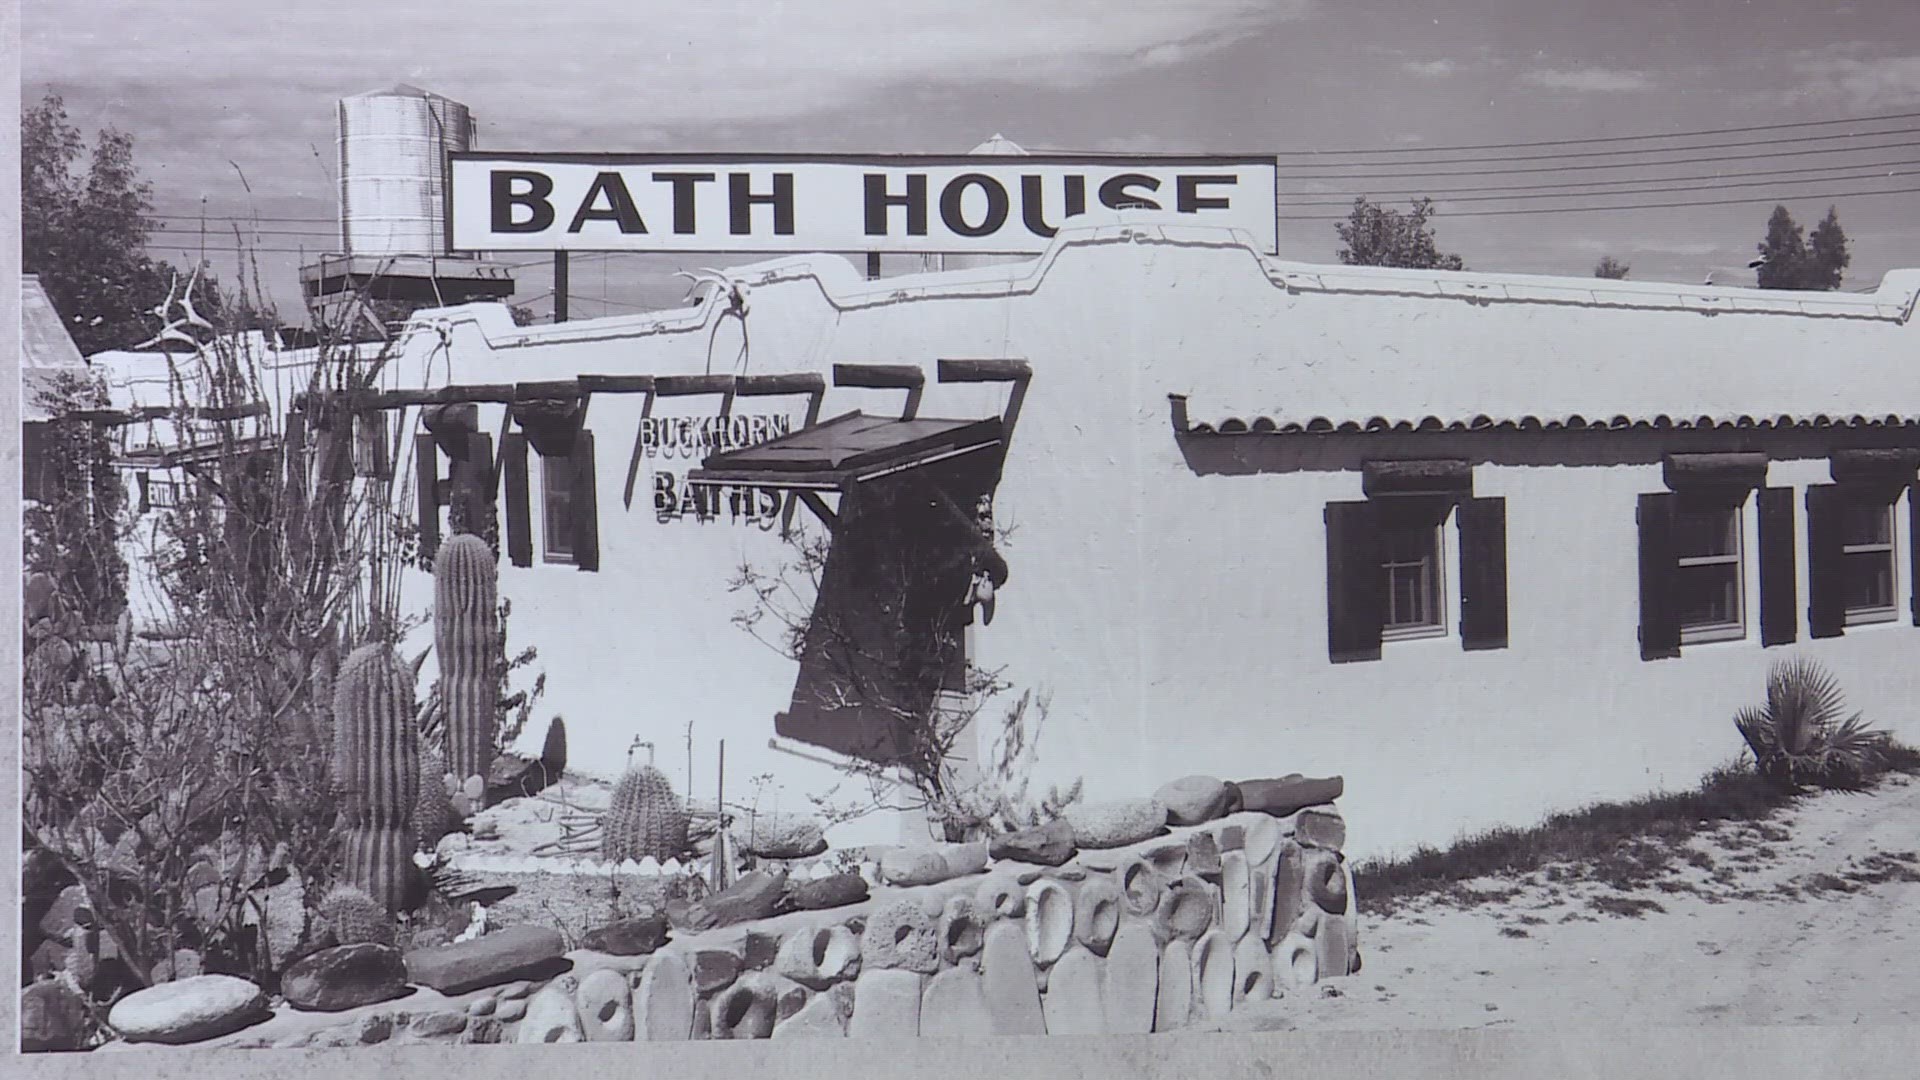 The origins of the Cactus League in the Valley are rooted in a local bath house. Stella Sun has the story of Buckhouse Baths.